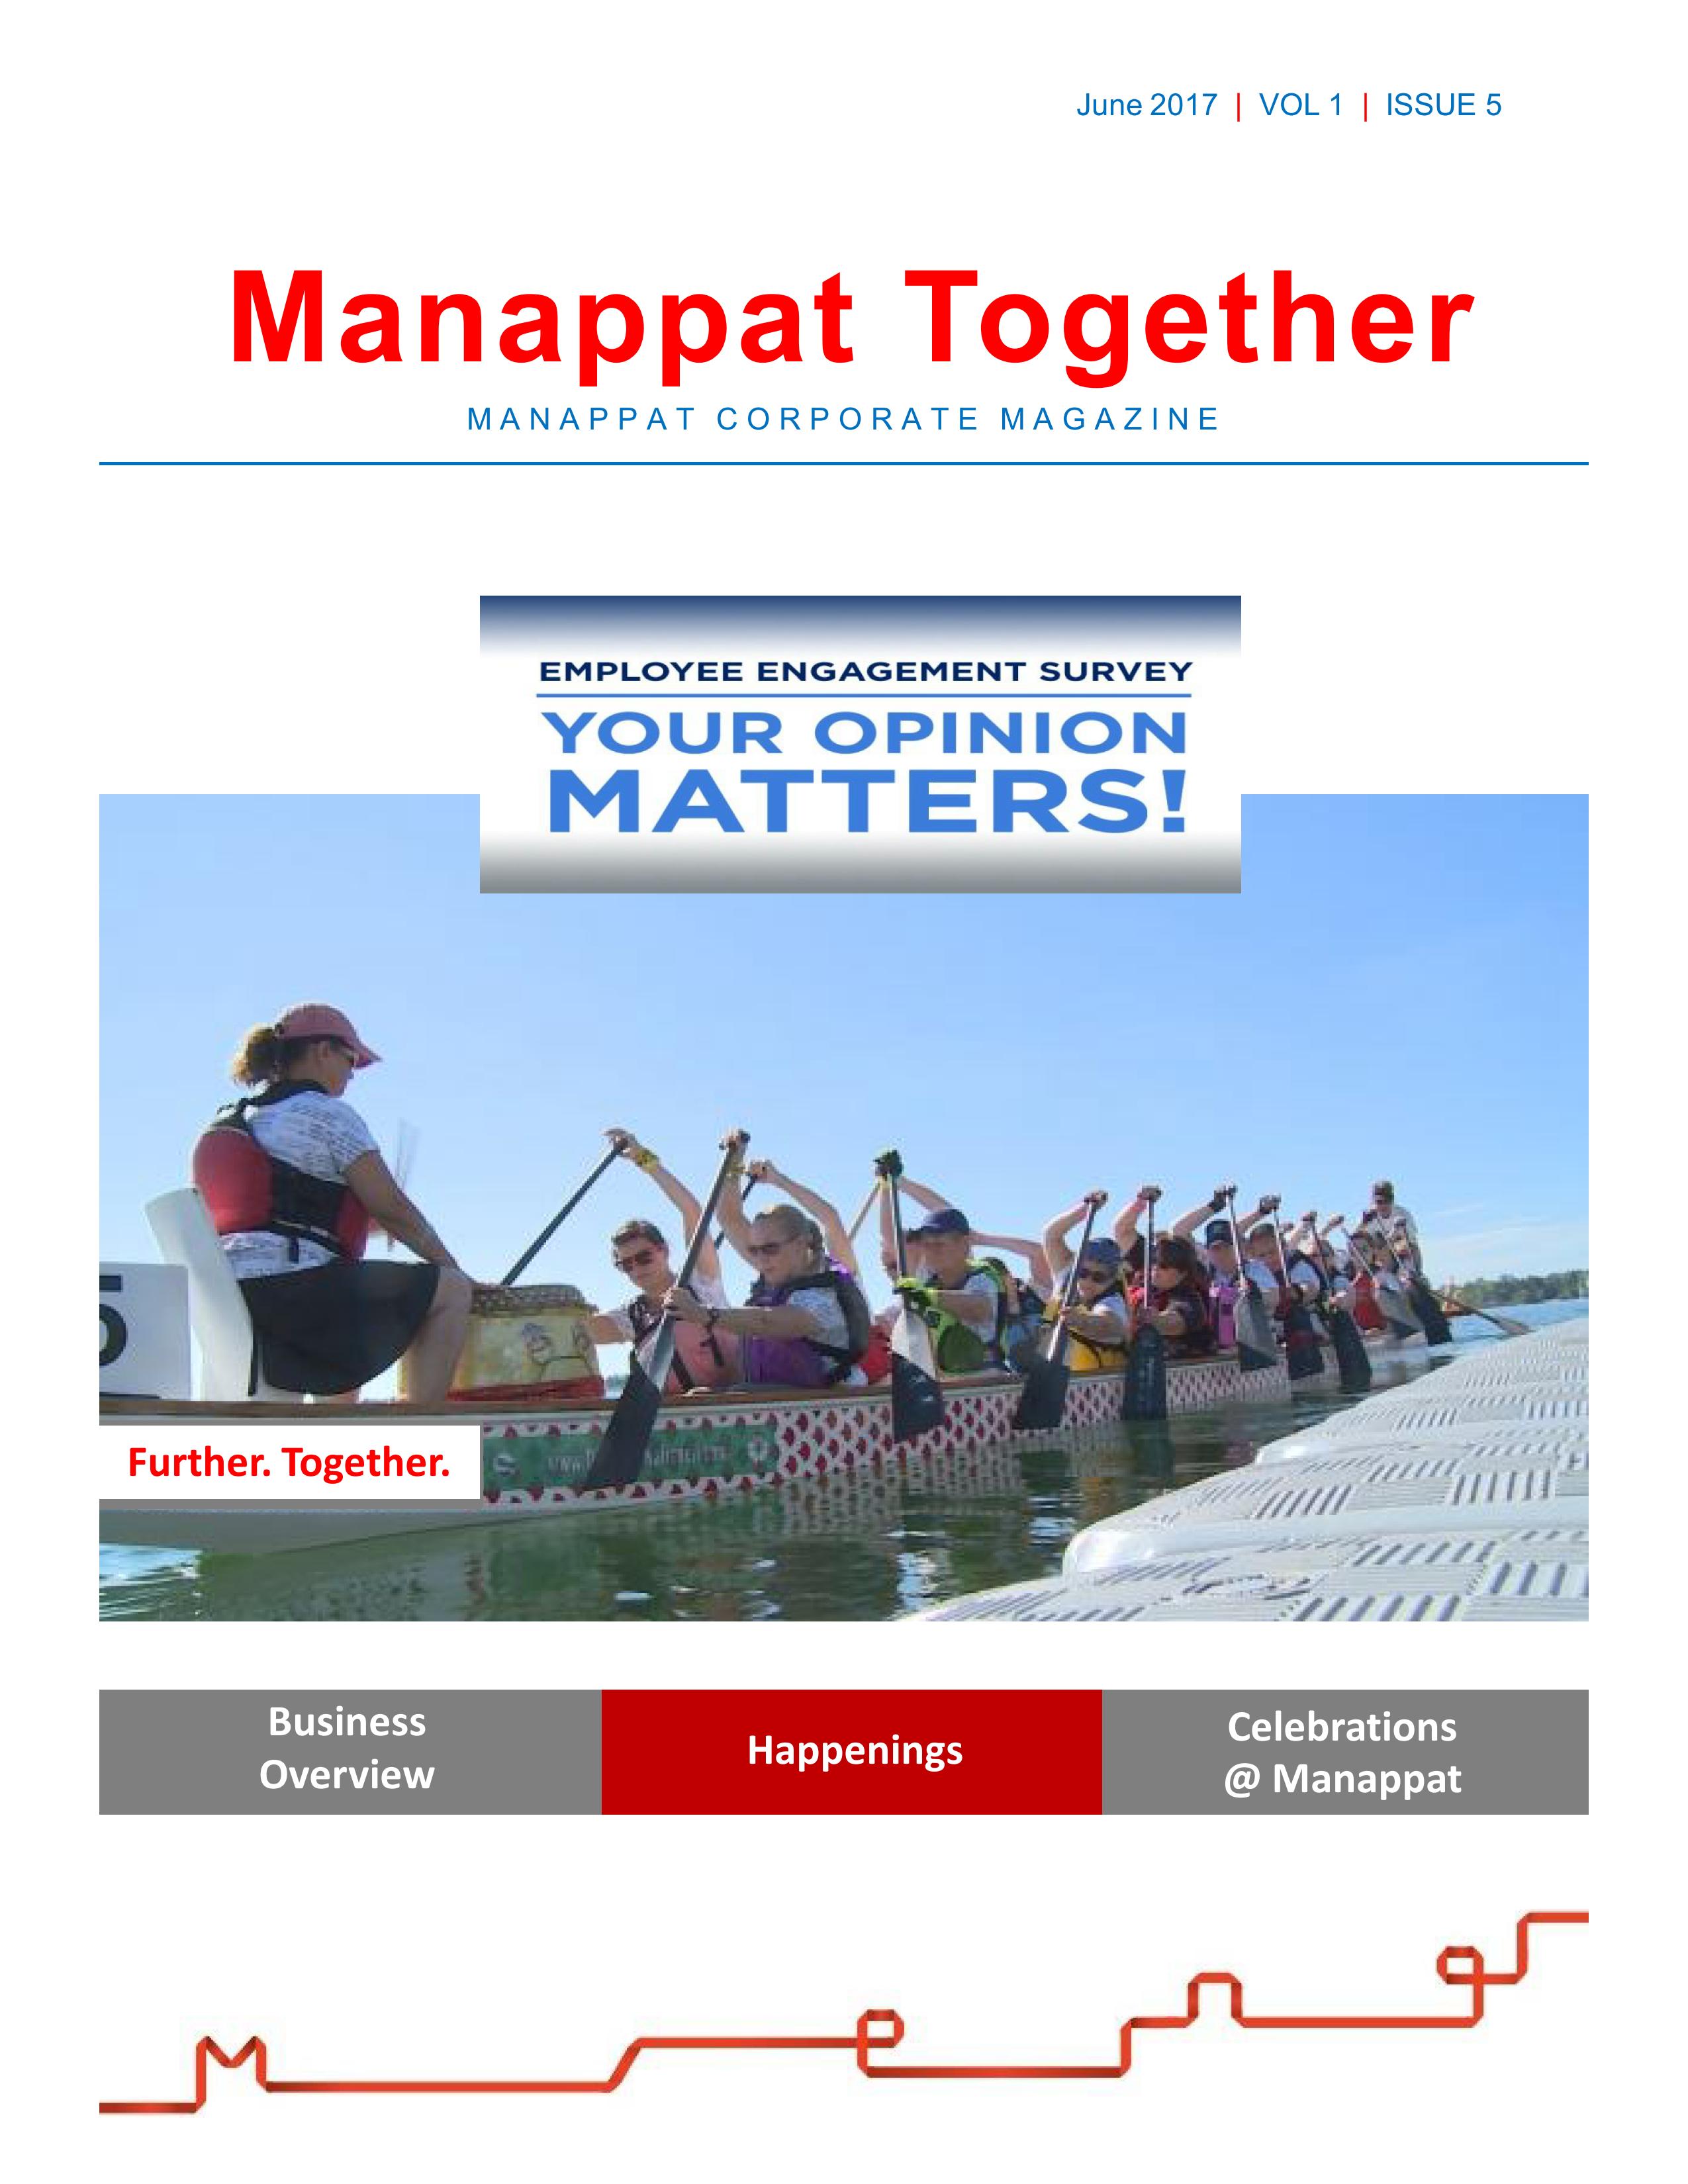 Manappat Together Volume-1-Issue-5